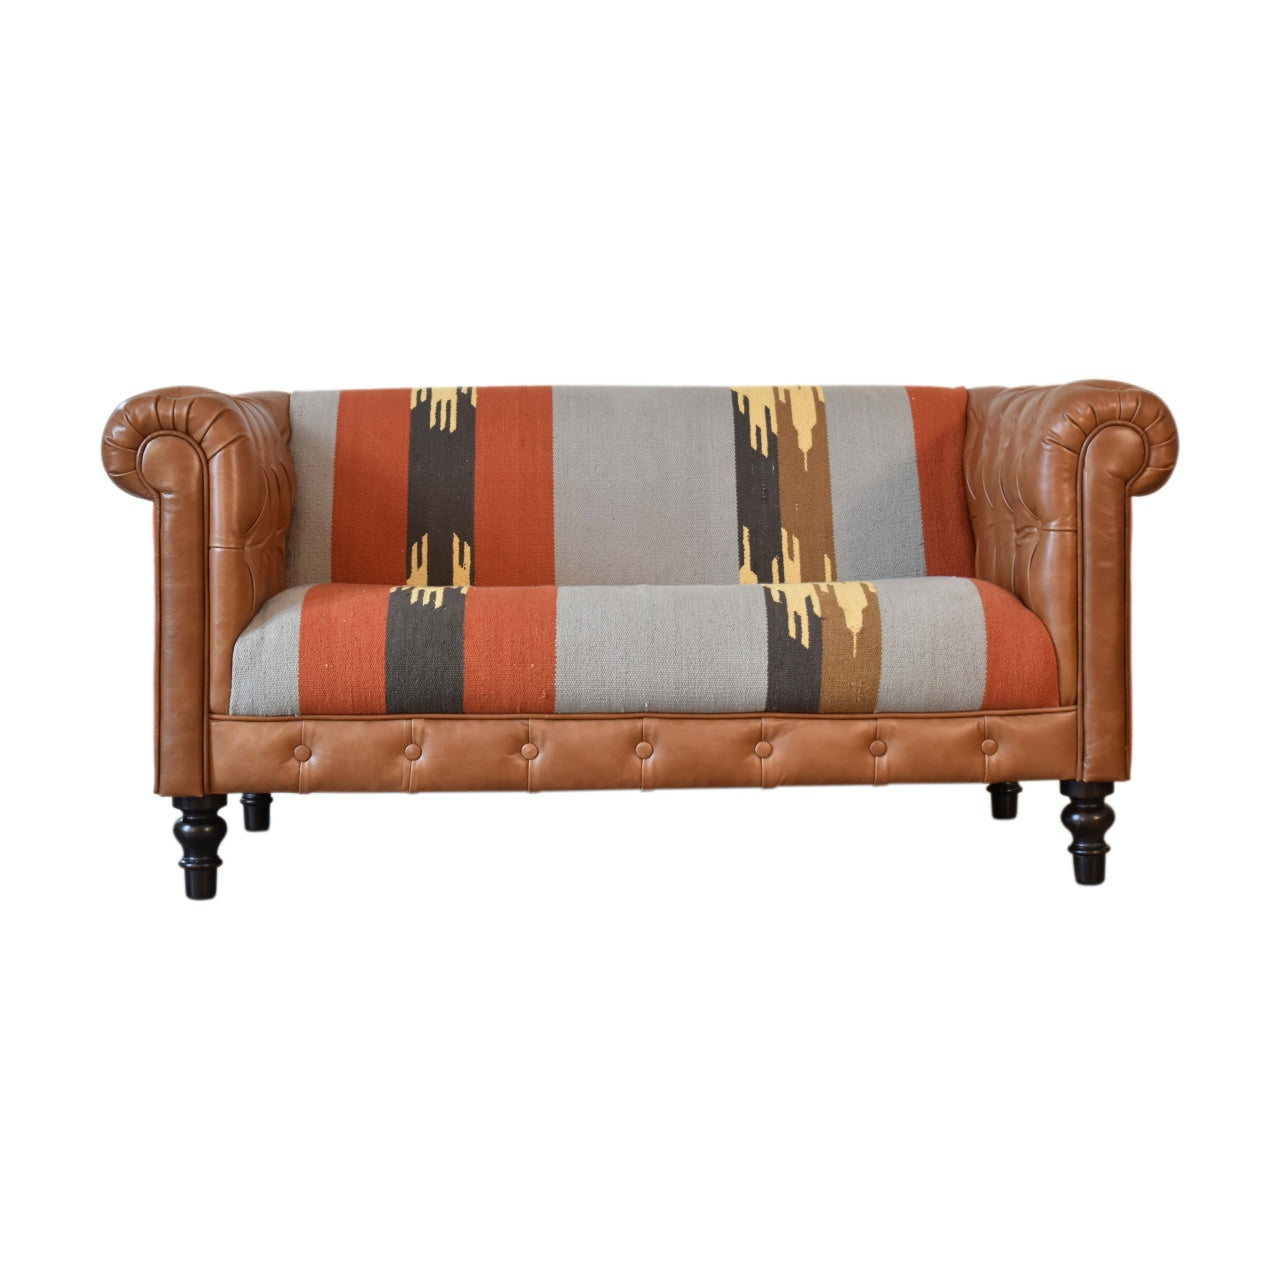 View Durrie Leather Mixed Sofa information